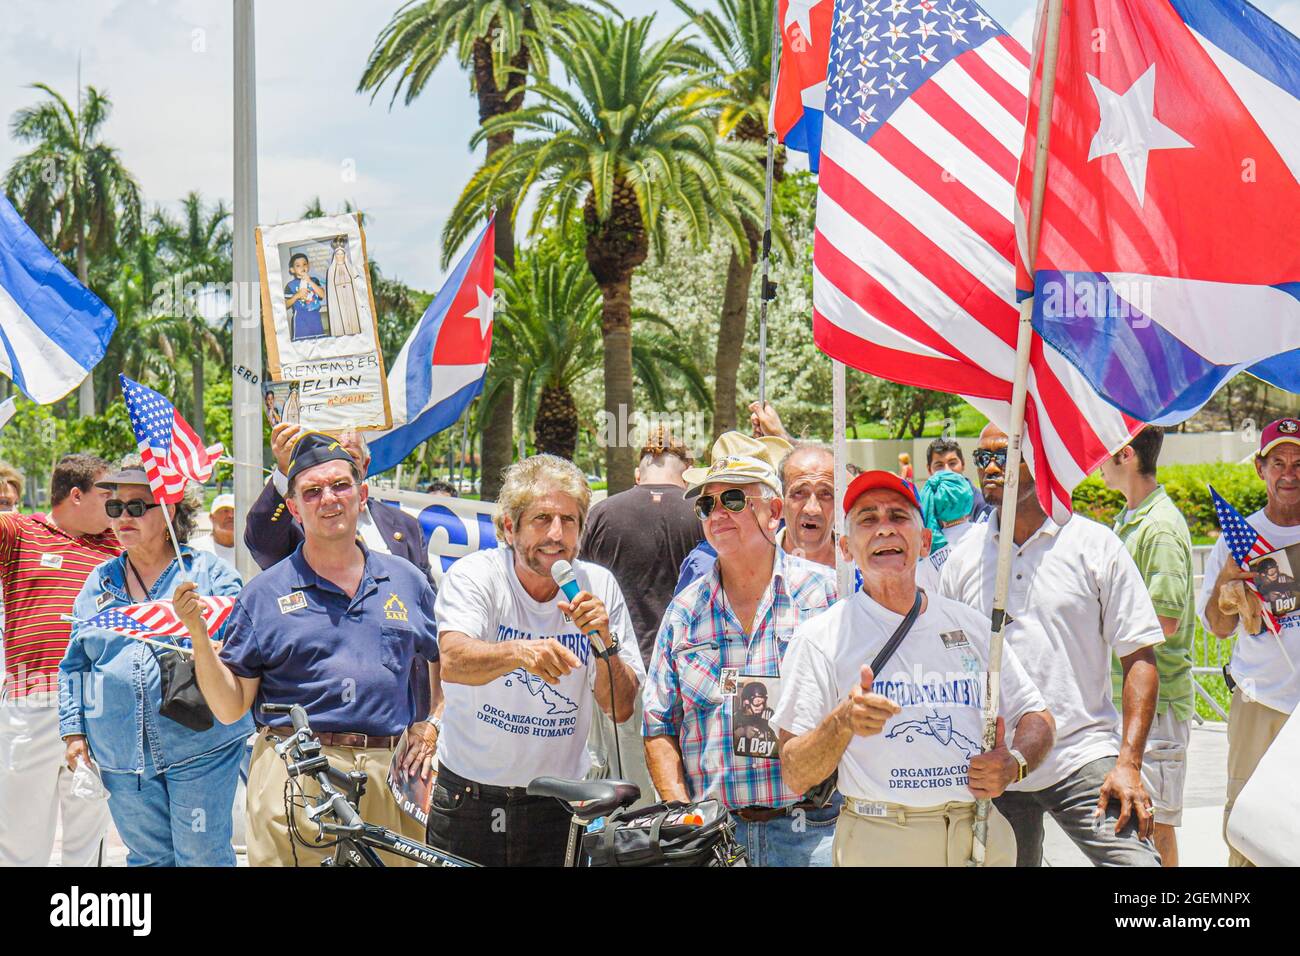 Miami Florida,Biscayne Boulevard Cuban protesters protest exile group,Vigilia Mambisa Hispanic men male flags demonstrate Miguel Saavedra, Stock Photo